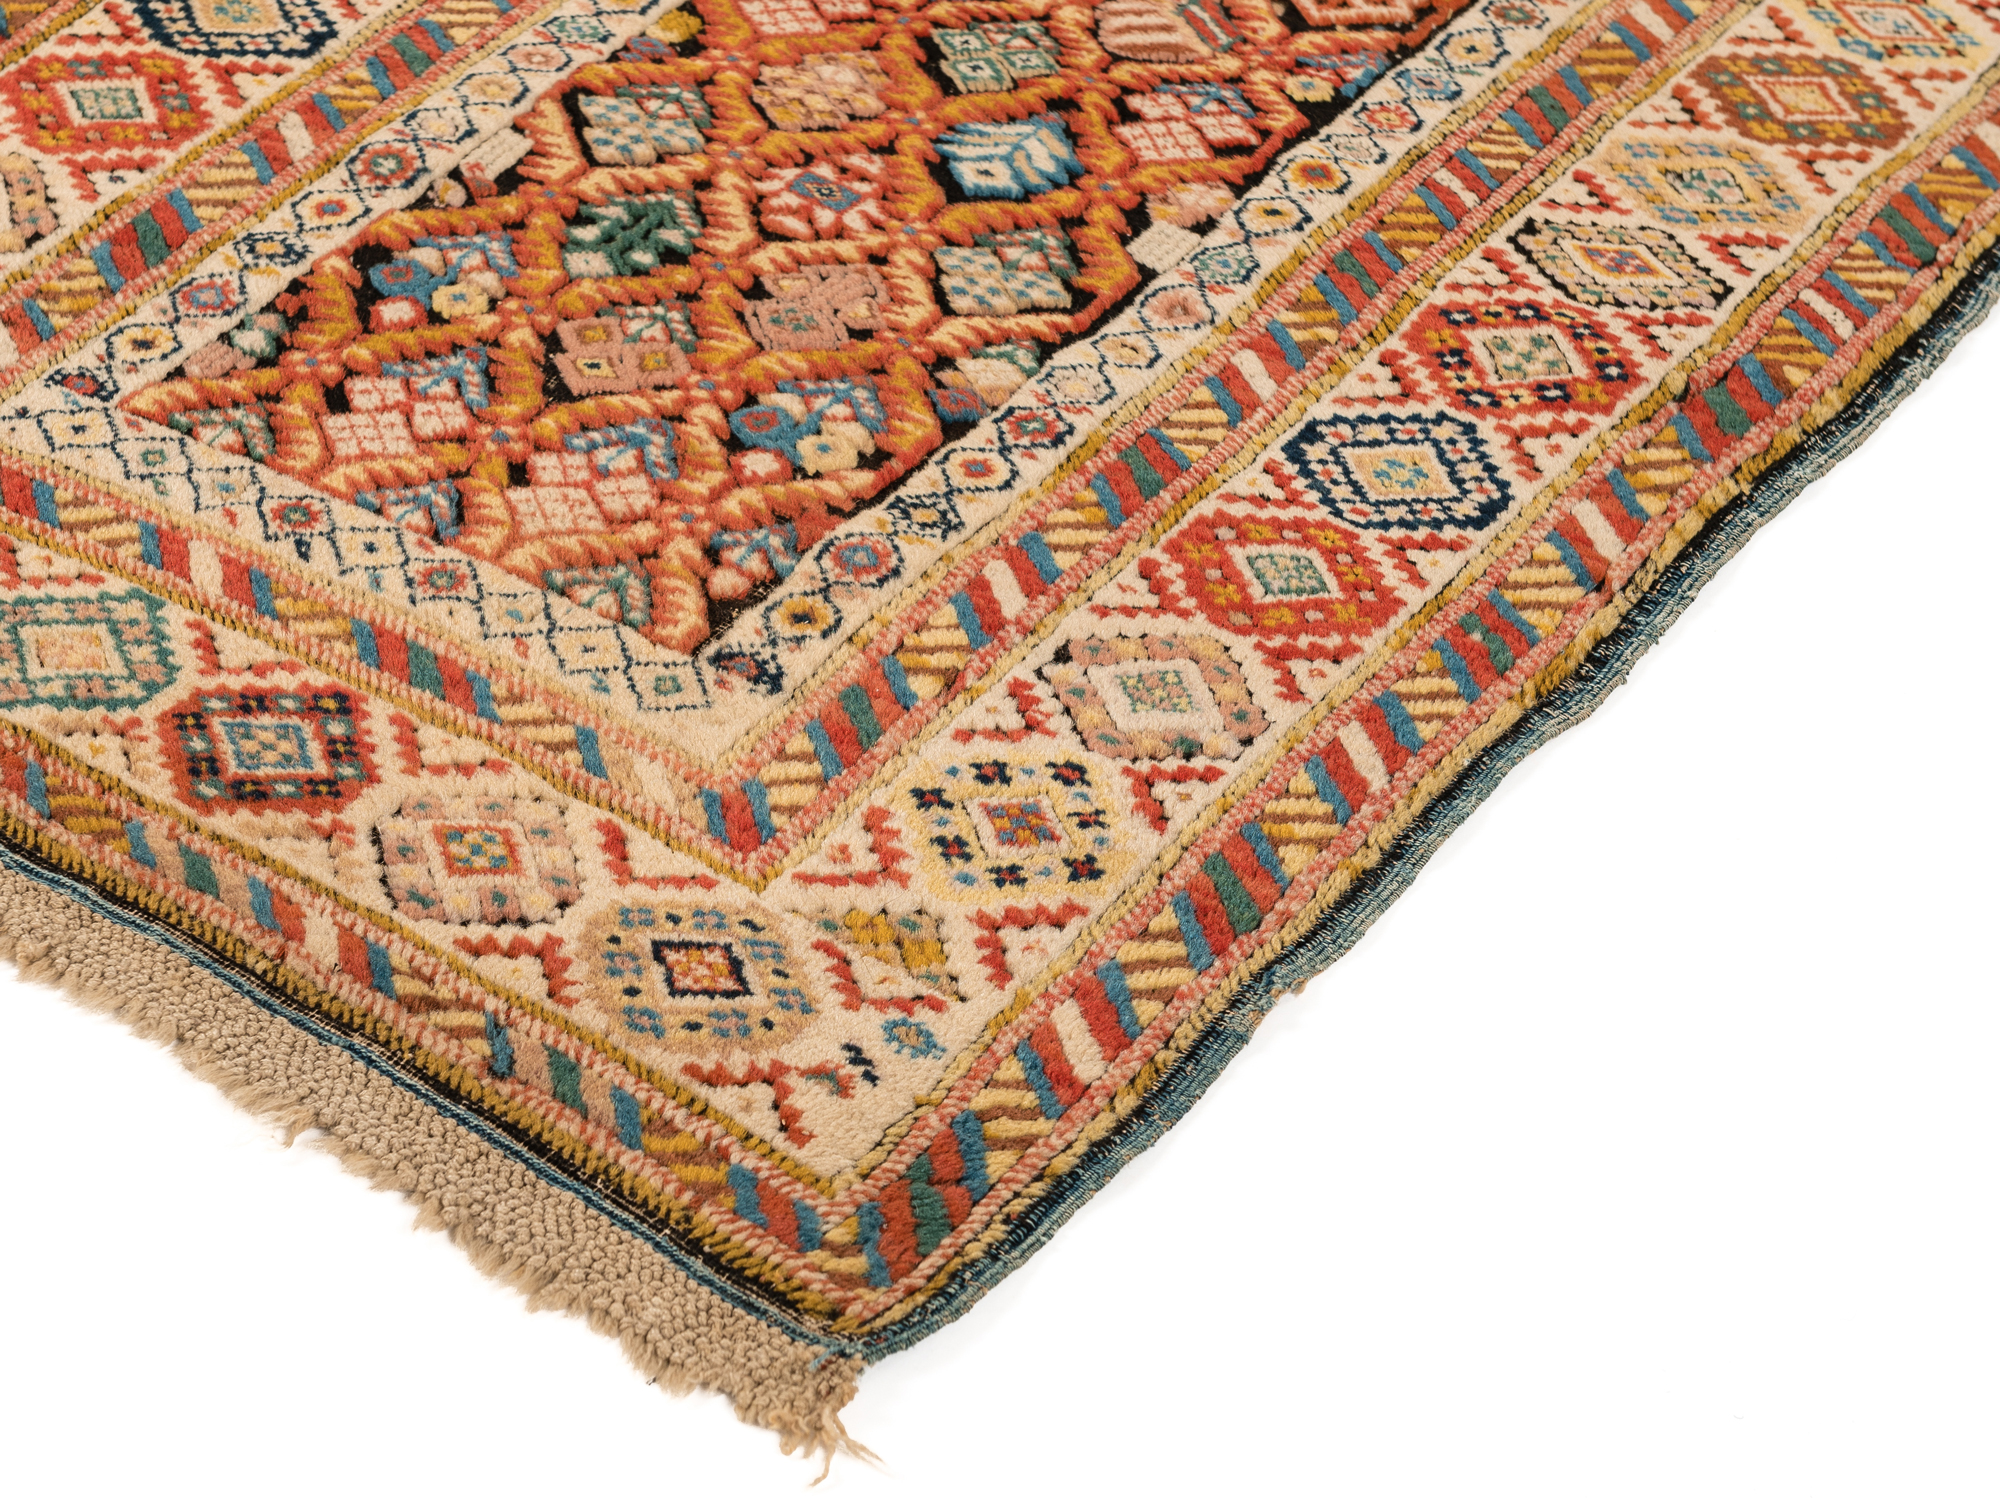 Detail of antique Caucasian Kuba runner with a lattice design on an oxidized brown field that is framed by an ivory border, circa 1880